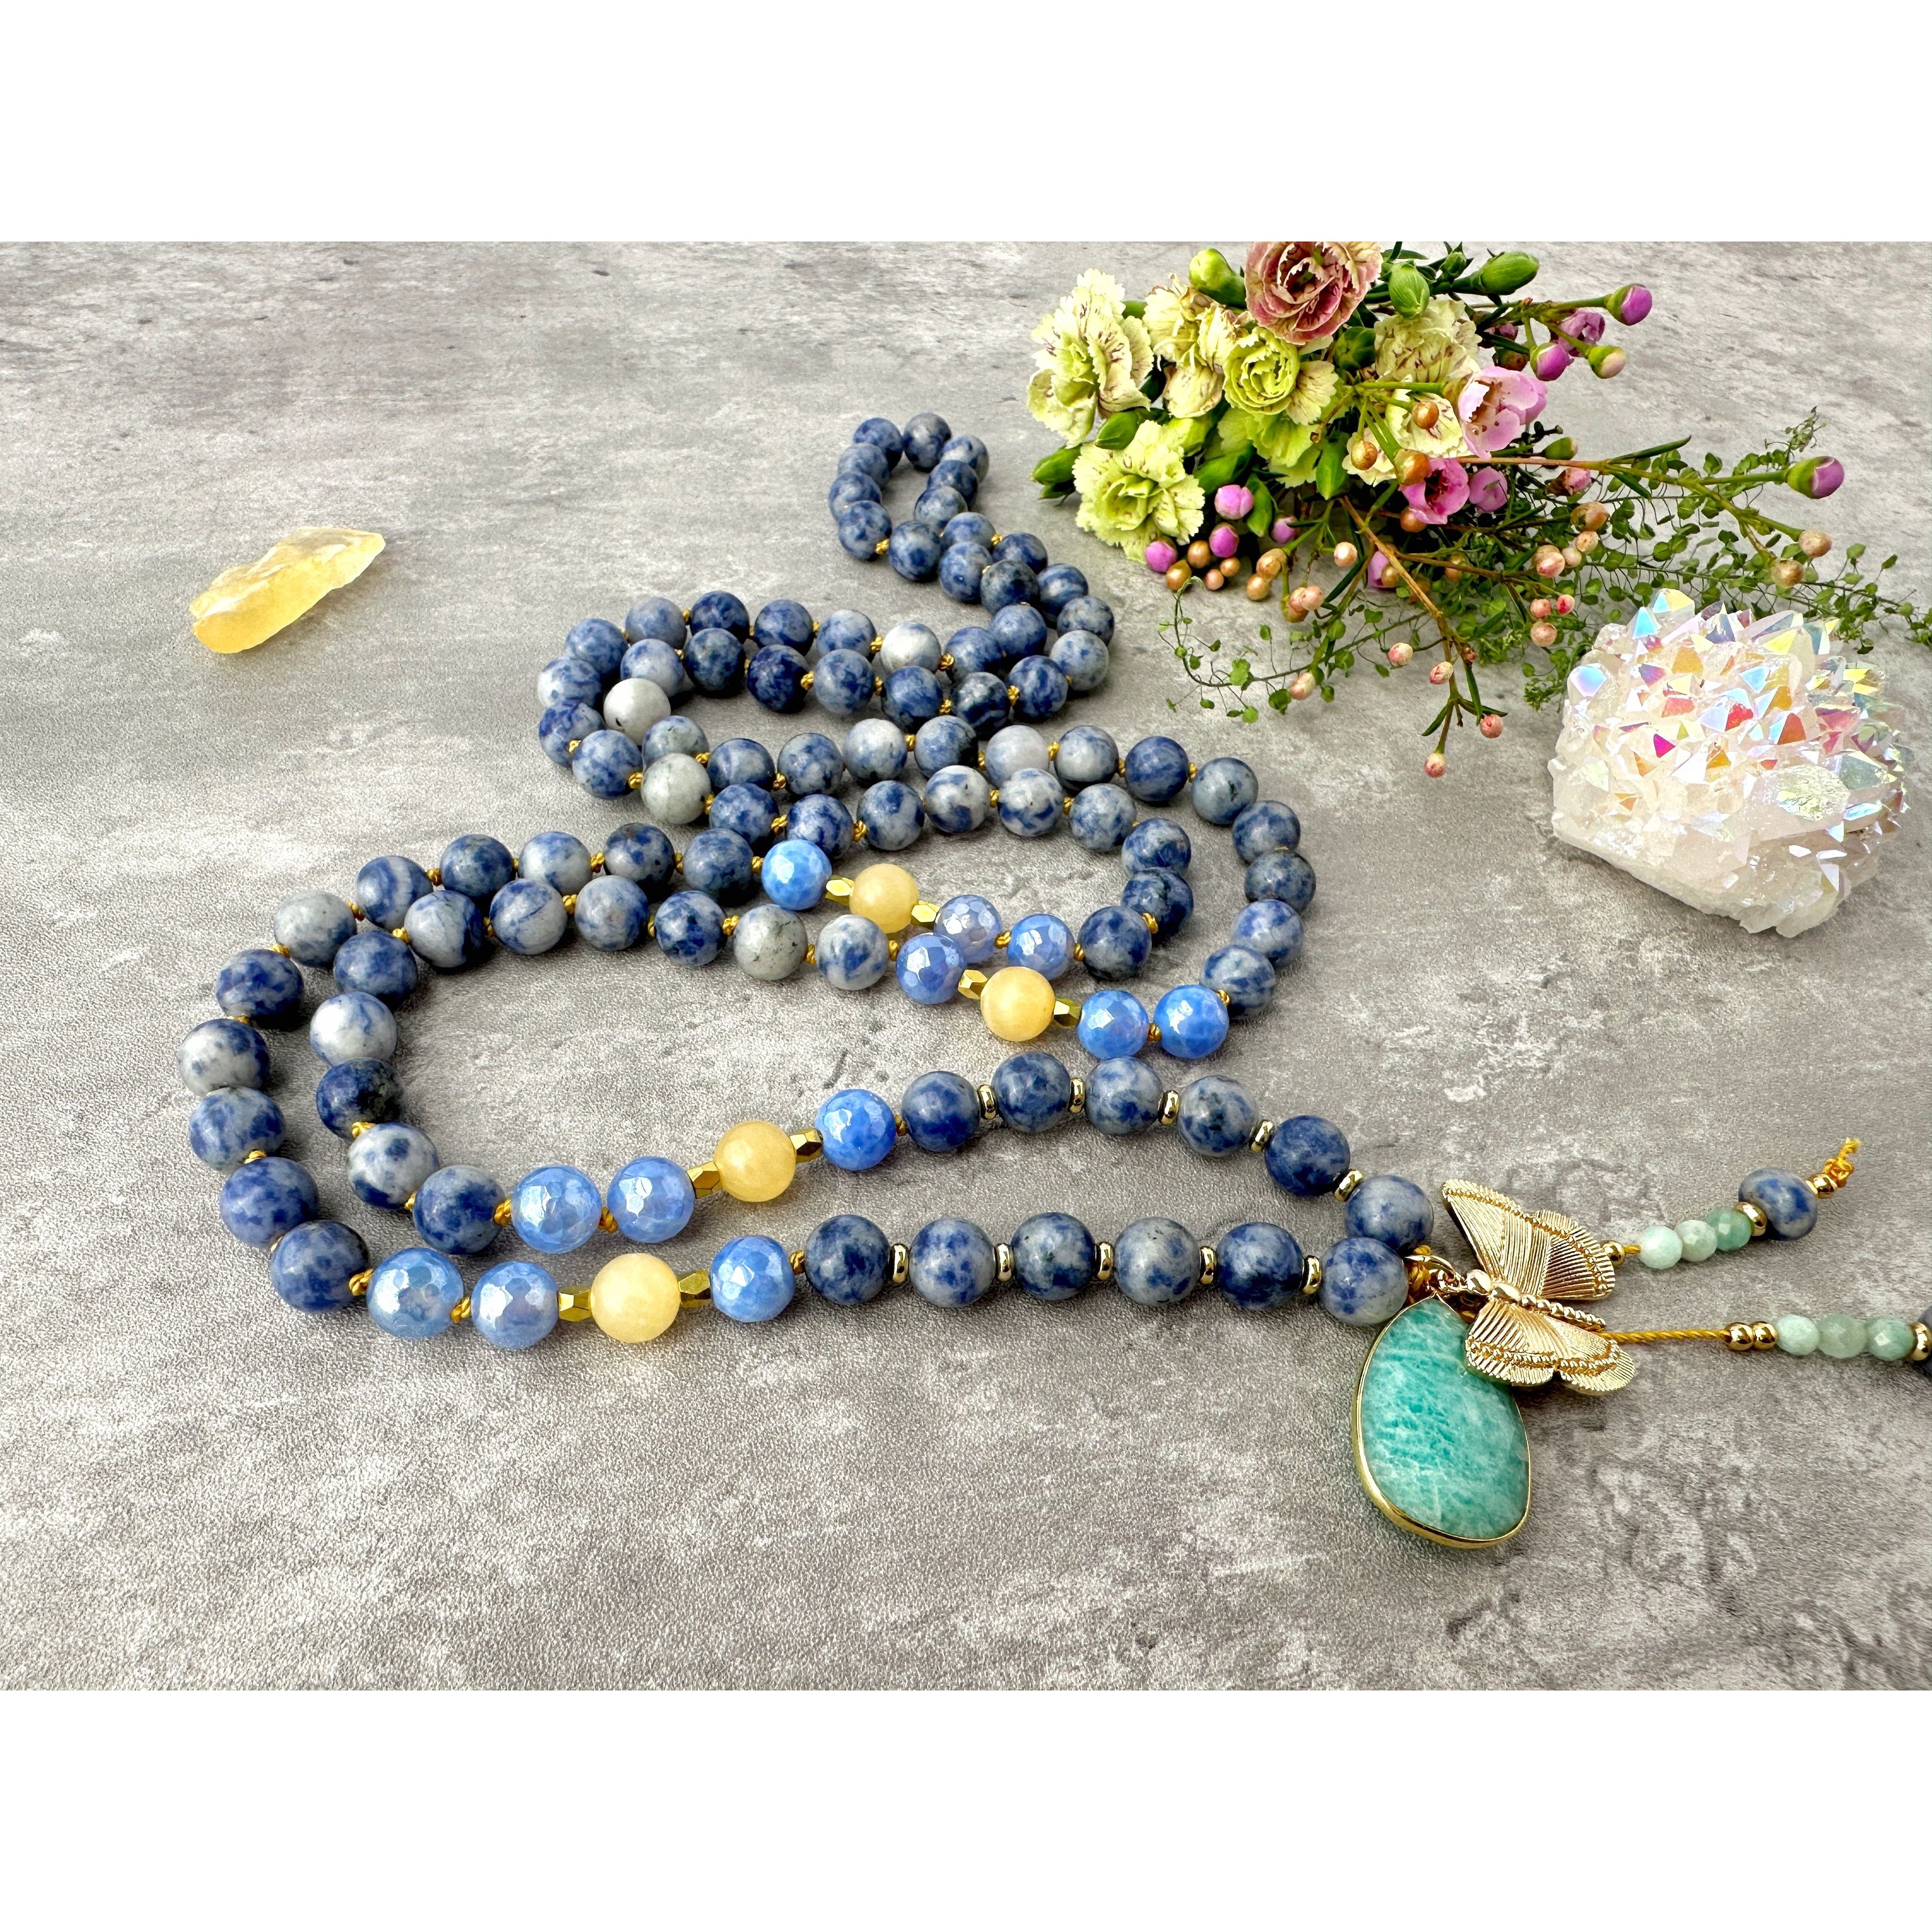 mala beads necklace with blue yellow gemstones. spotted jasper yellow jade blue fire agate meditation necklace knotted with nylon cord between each bead. amazonite guru crystal and butterfly charm